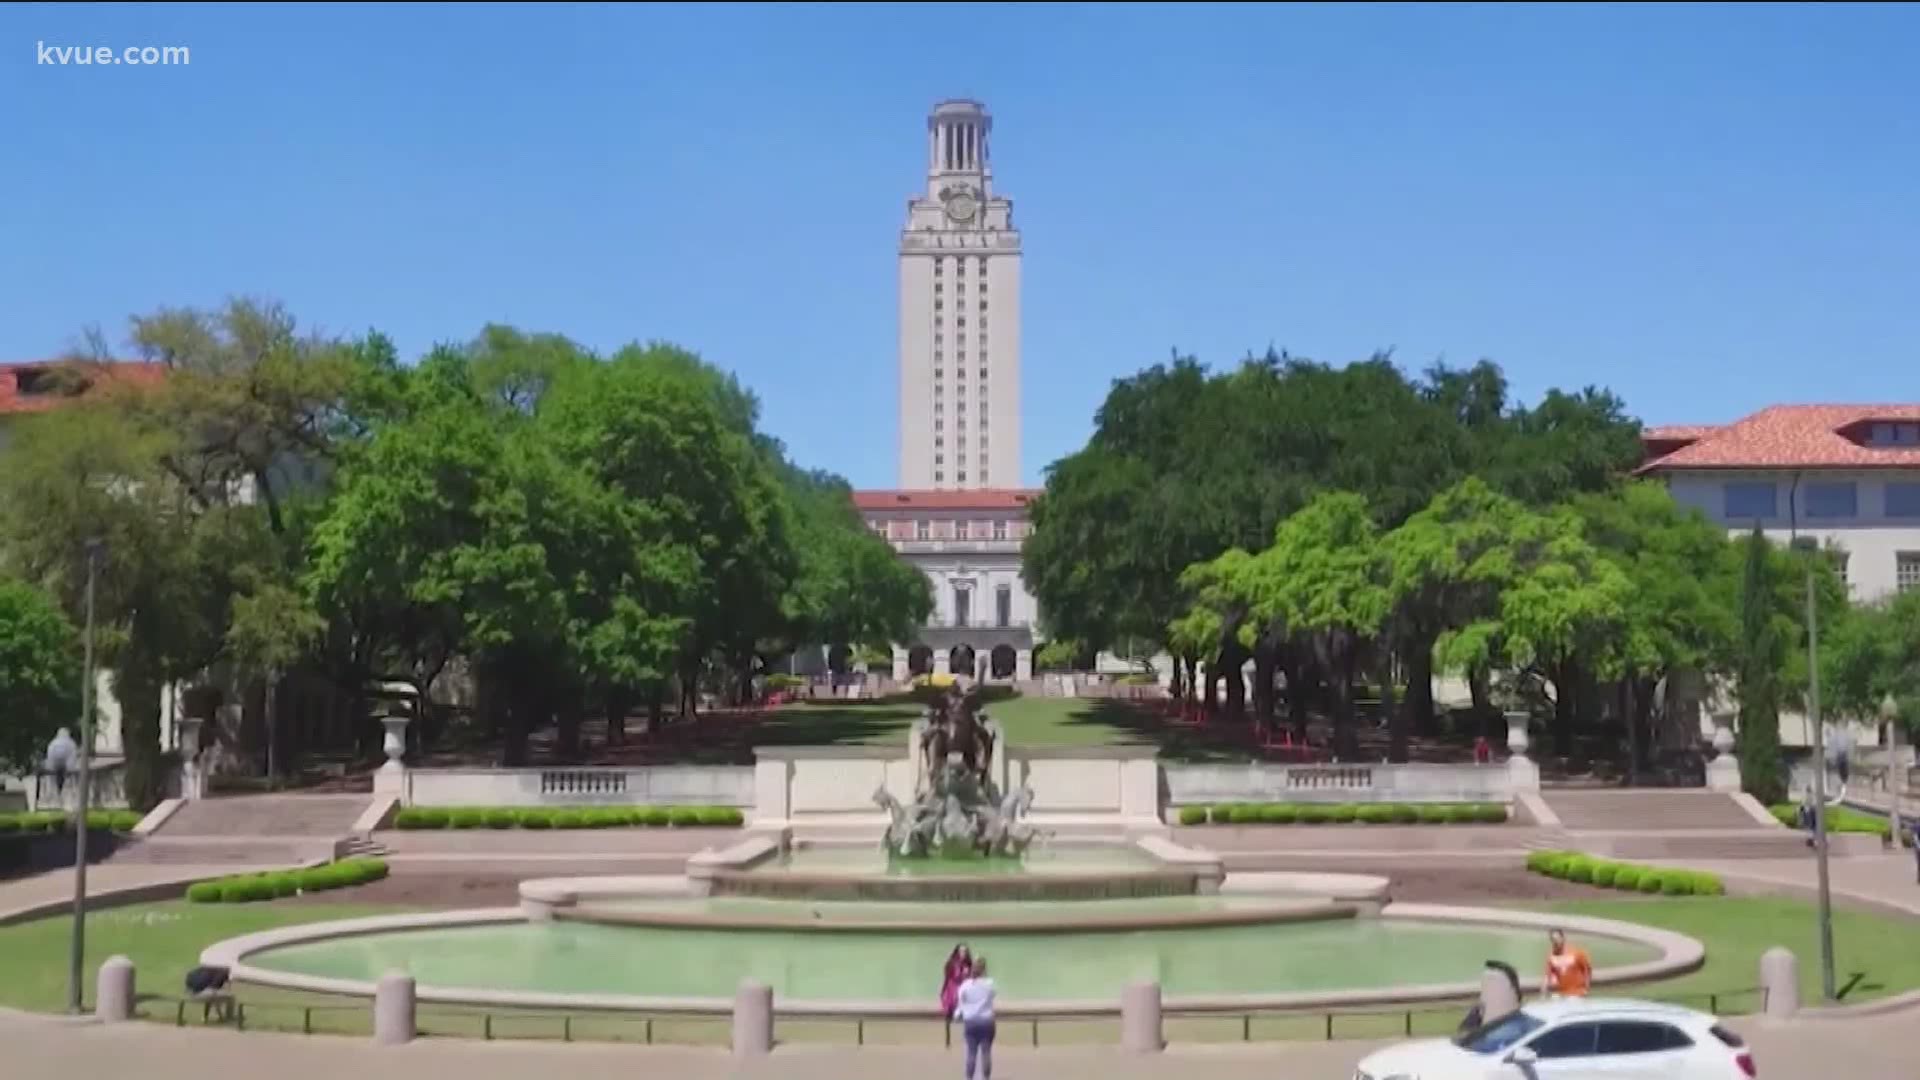 UT announced it will lay off or furlough staff members in several departments to cut costs. At the same time, the school is dealing with a new COVID-19 outbreak.